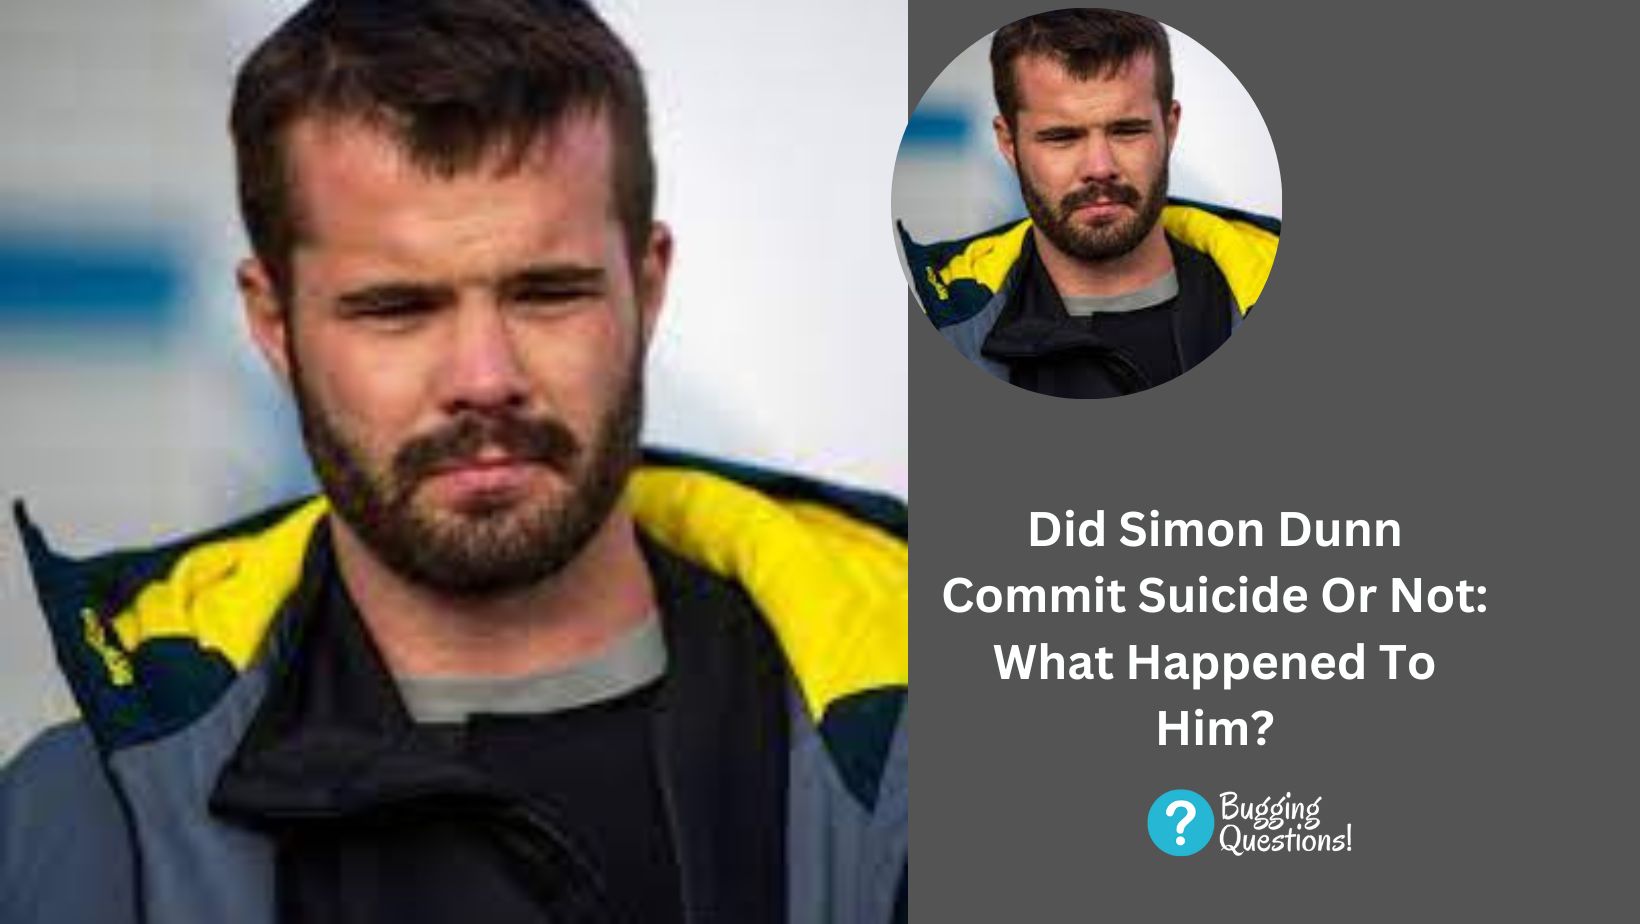 Did Simon Dunn Commit Suicide Or Not: What Happened To Him?